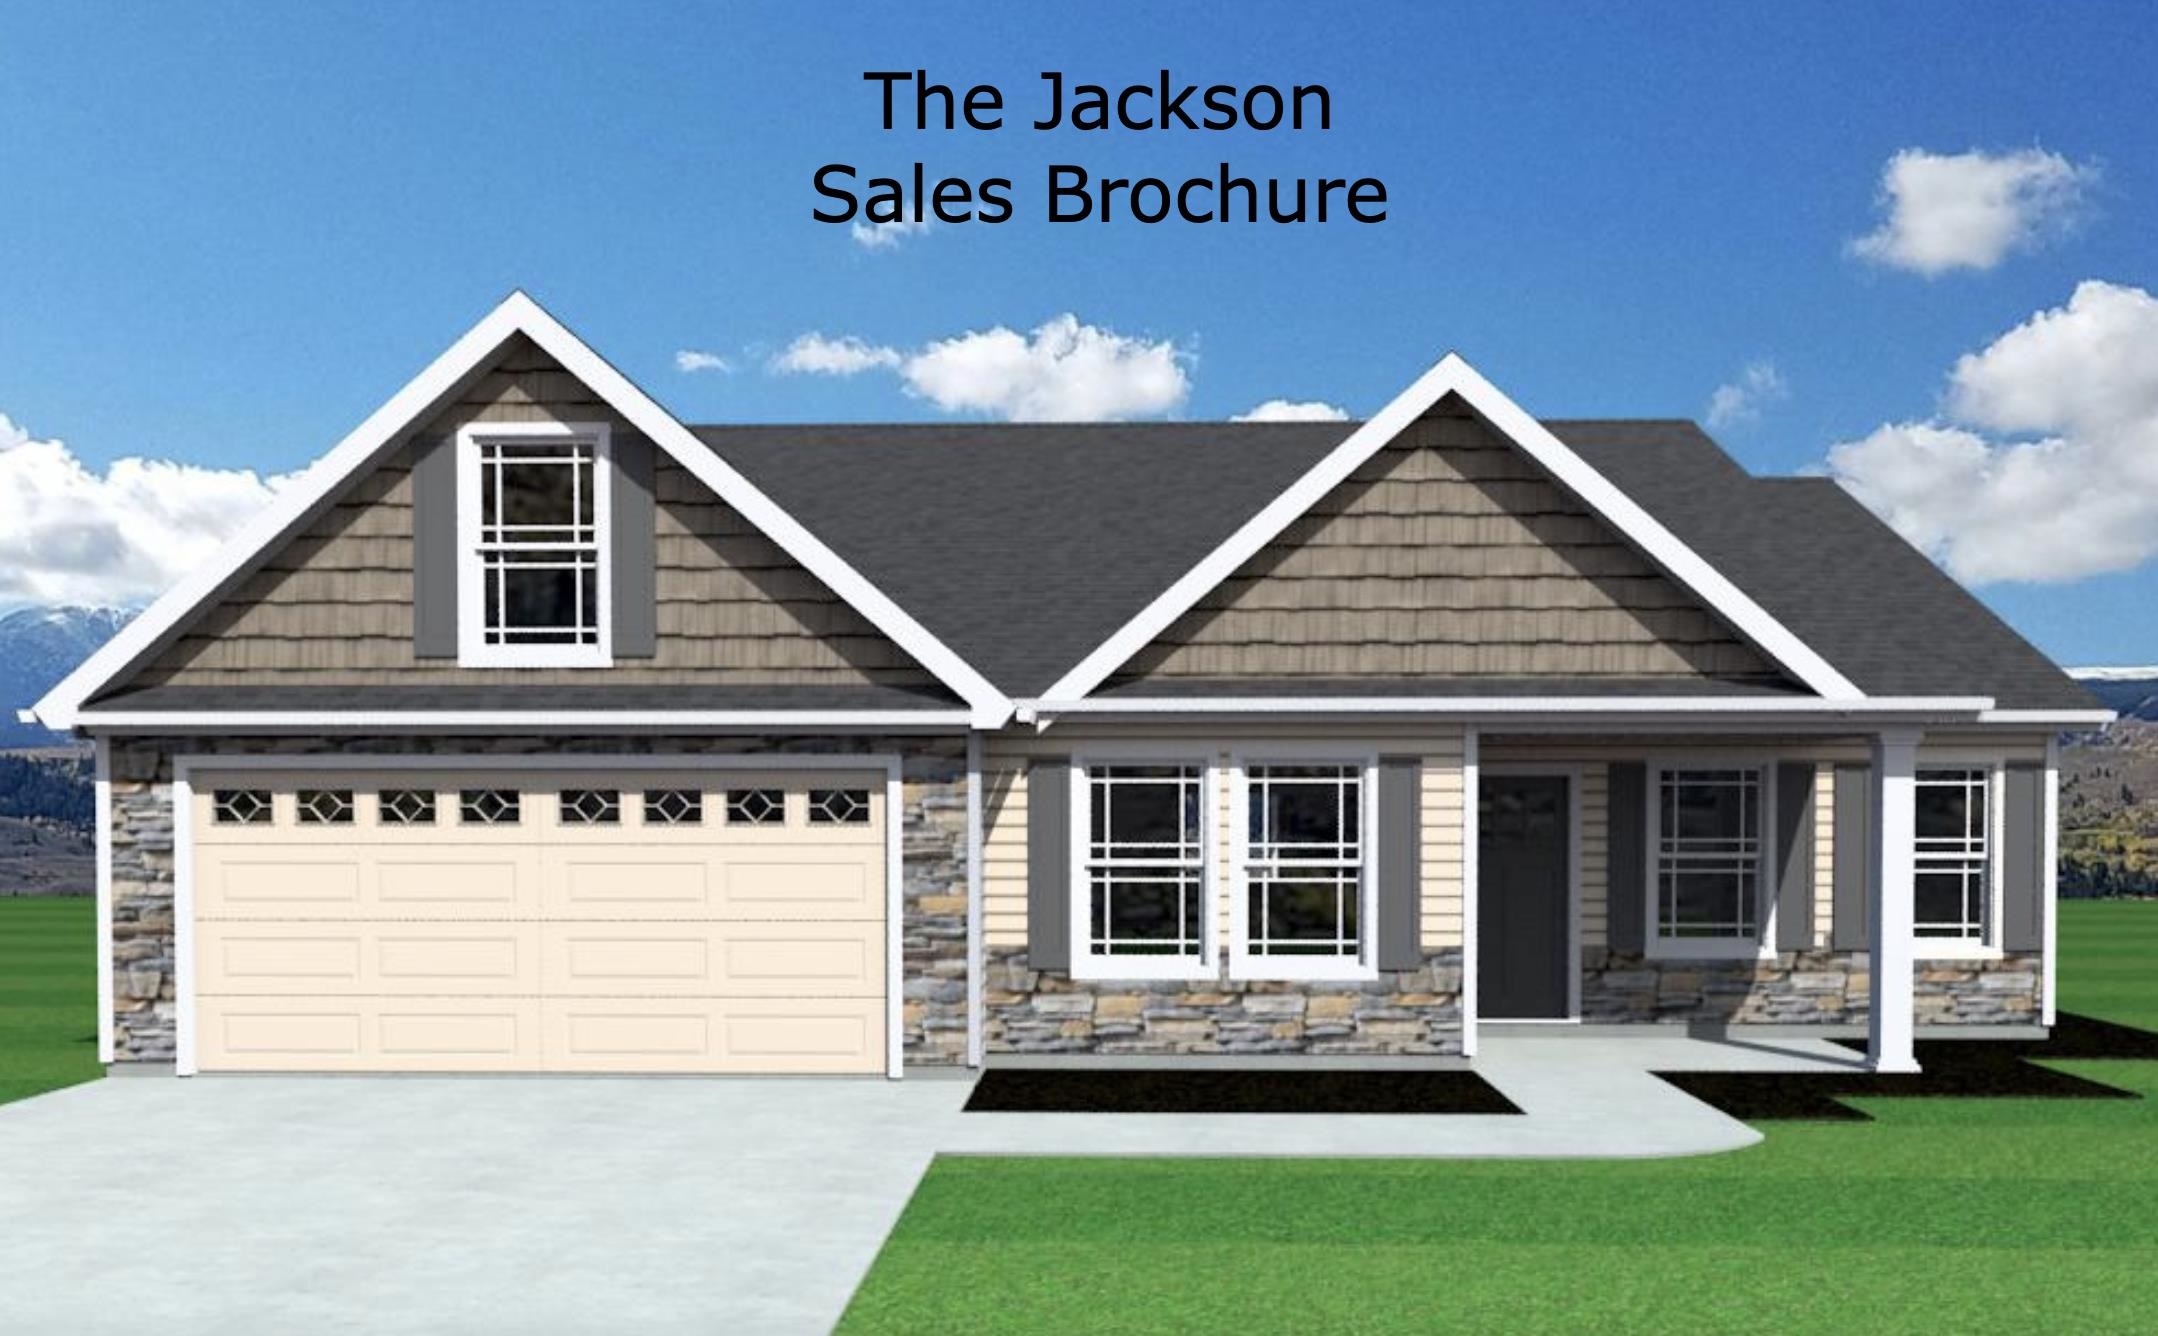 Lot 21 - The Jackson plan offers a beautiful, modern layout. Split floor plan. Kitchen open to living area.  Home complete with the trademark chair rail, crown molding, and rope lighting.  Also includes a 12x12 sunroom with 10x12 covered patio. Lot 21